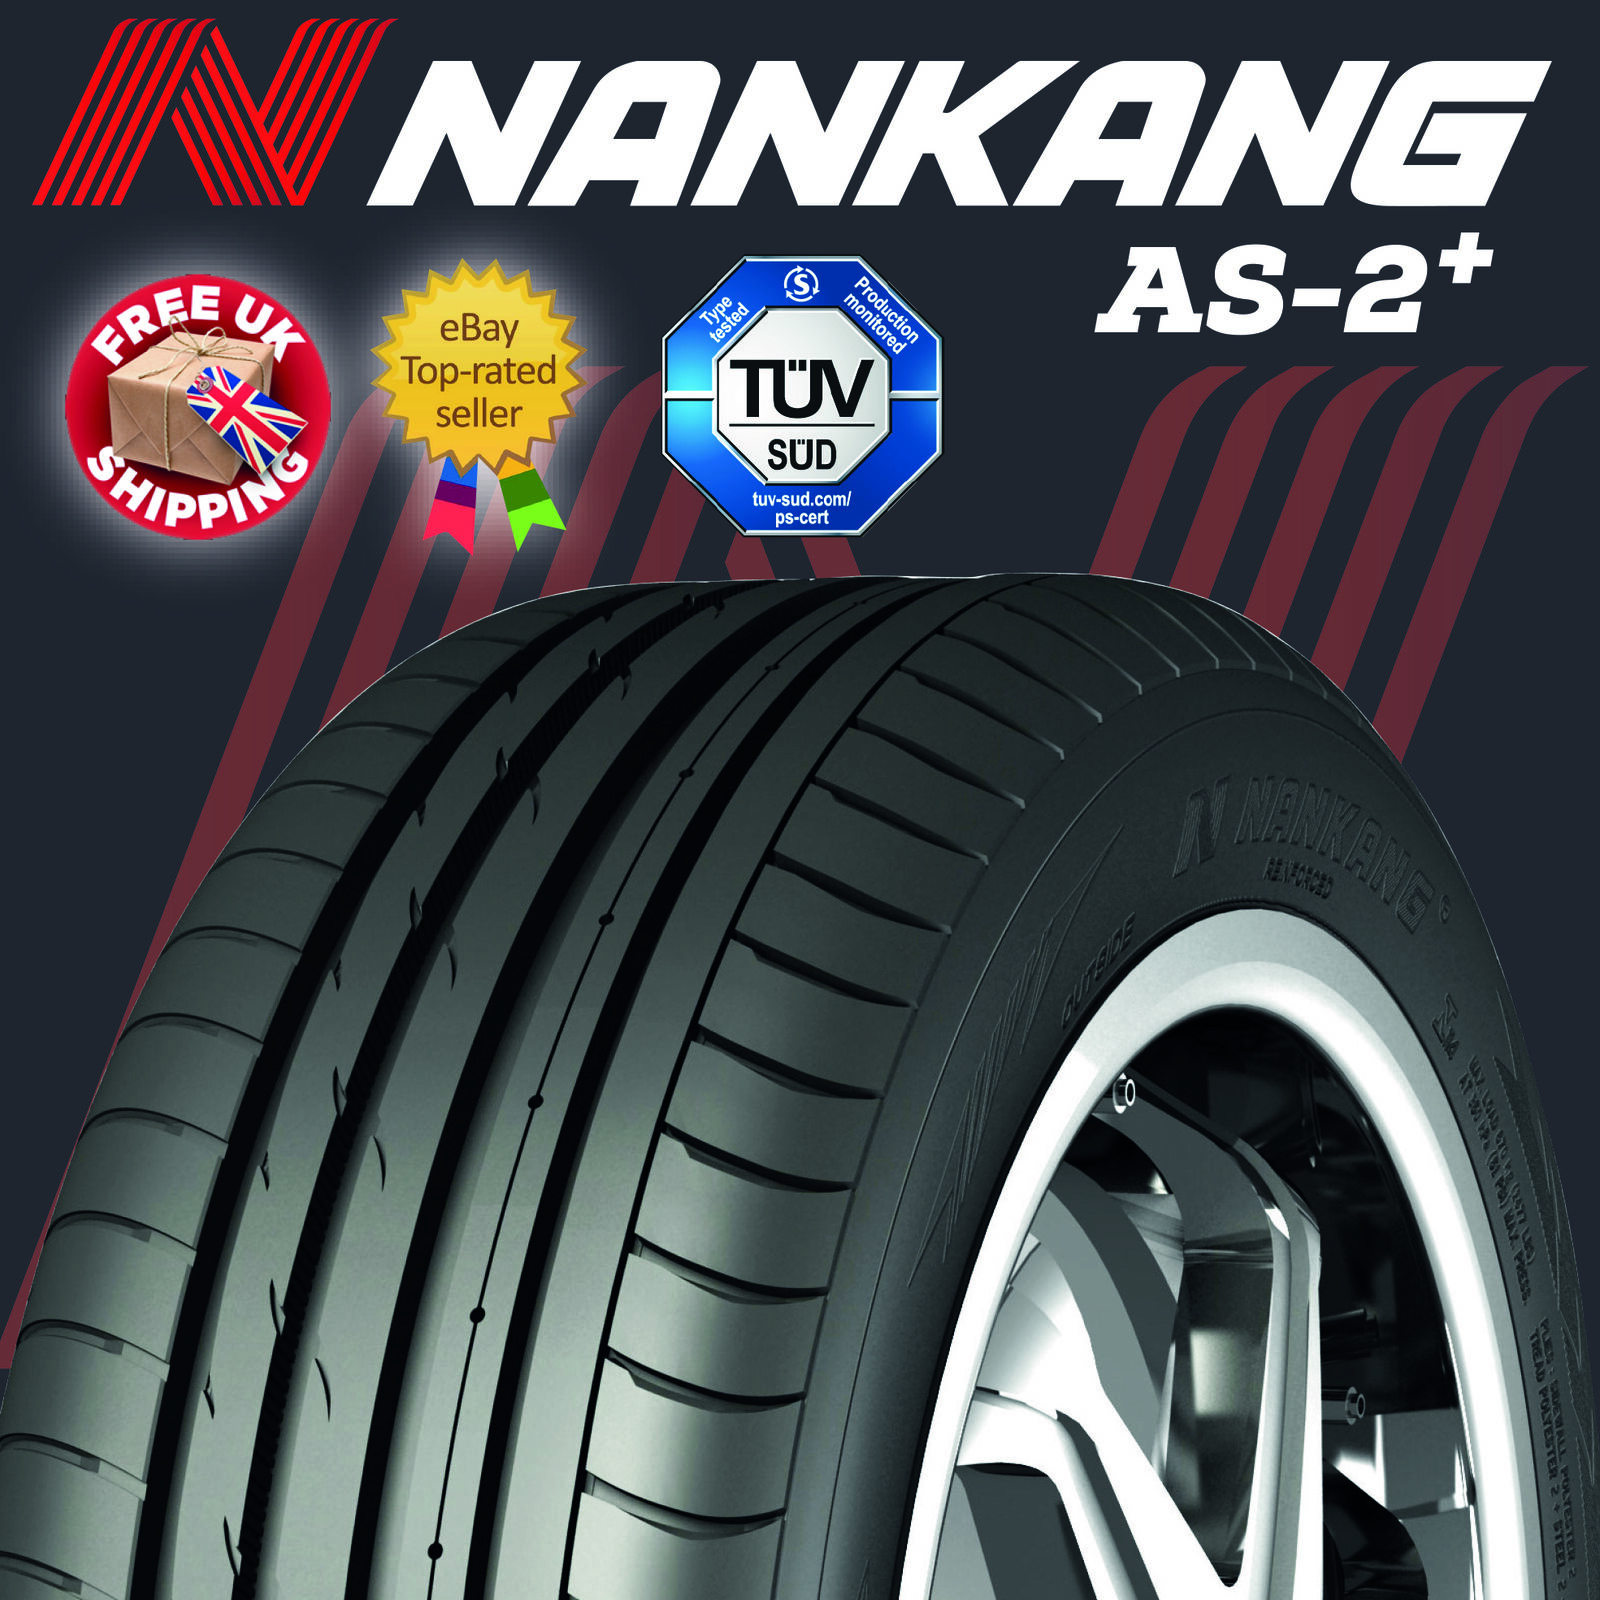 X1 275 30 20 97Y XL NANKANG AS-2+ QUALITY TYRE WITH UNBEATABLE ( A ) WET GRIP